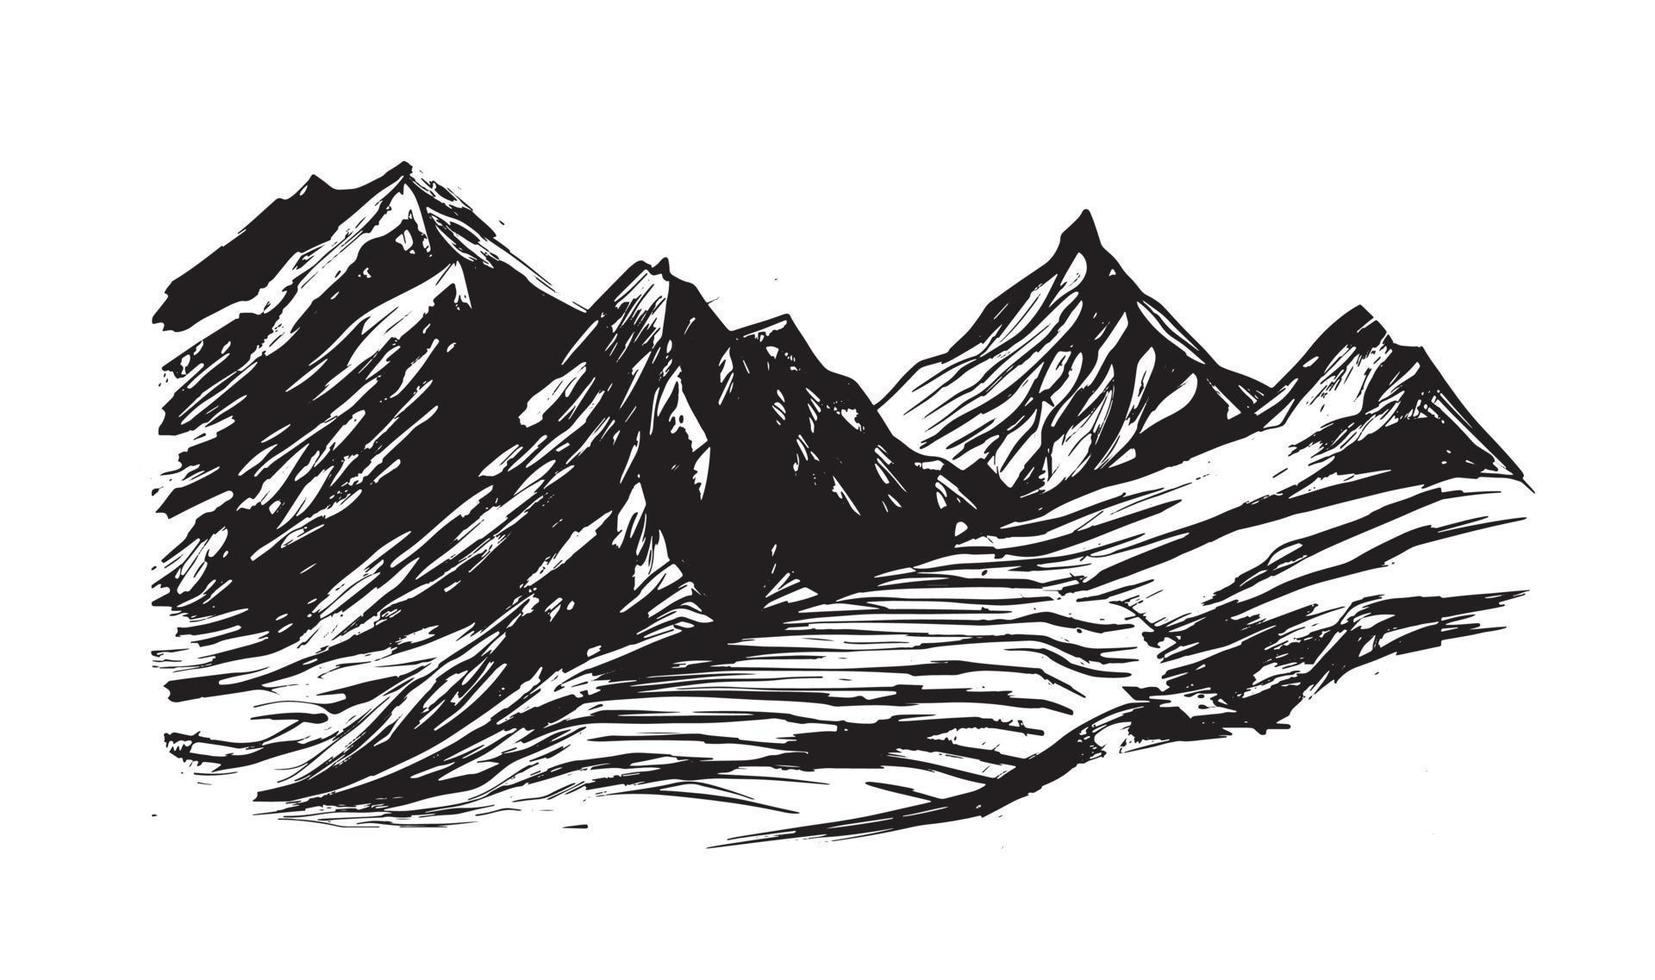 Mountain landscape, sketch style, vector illustrations